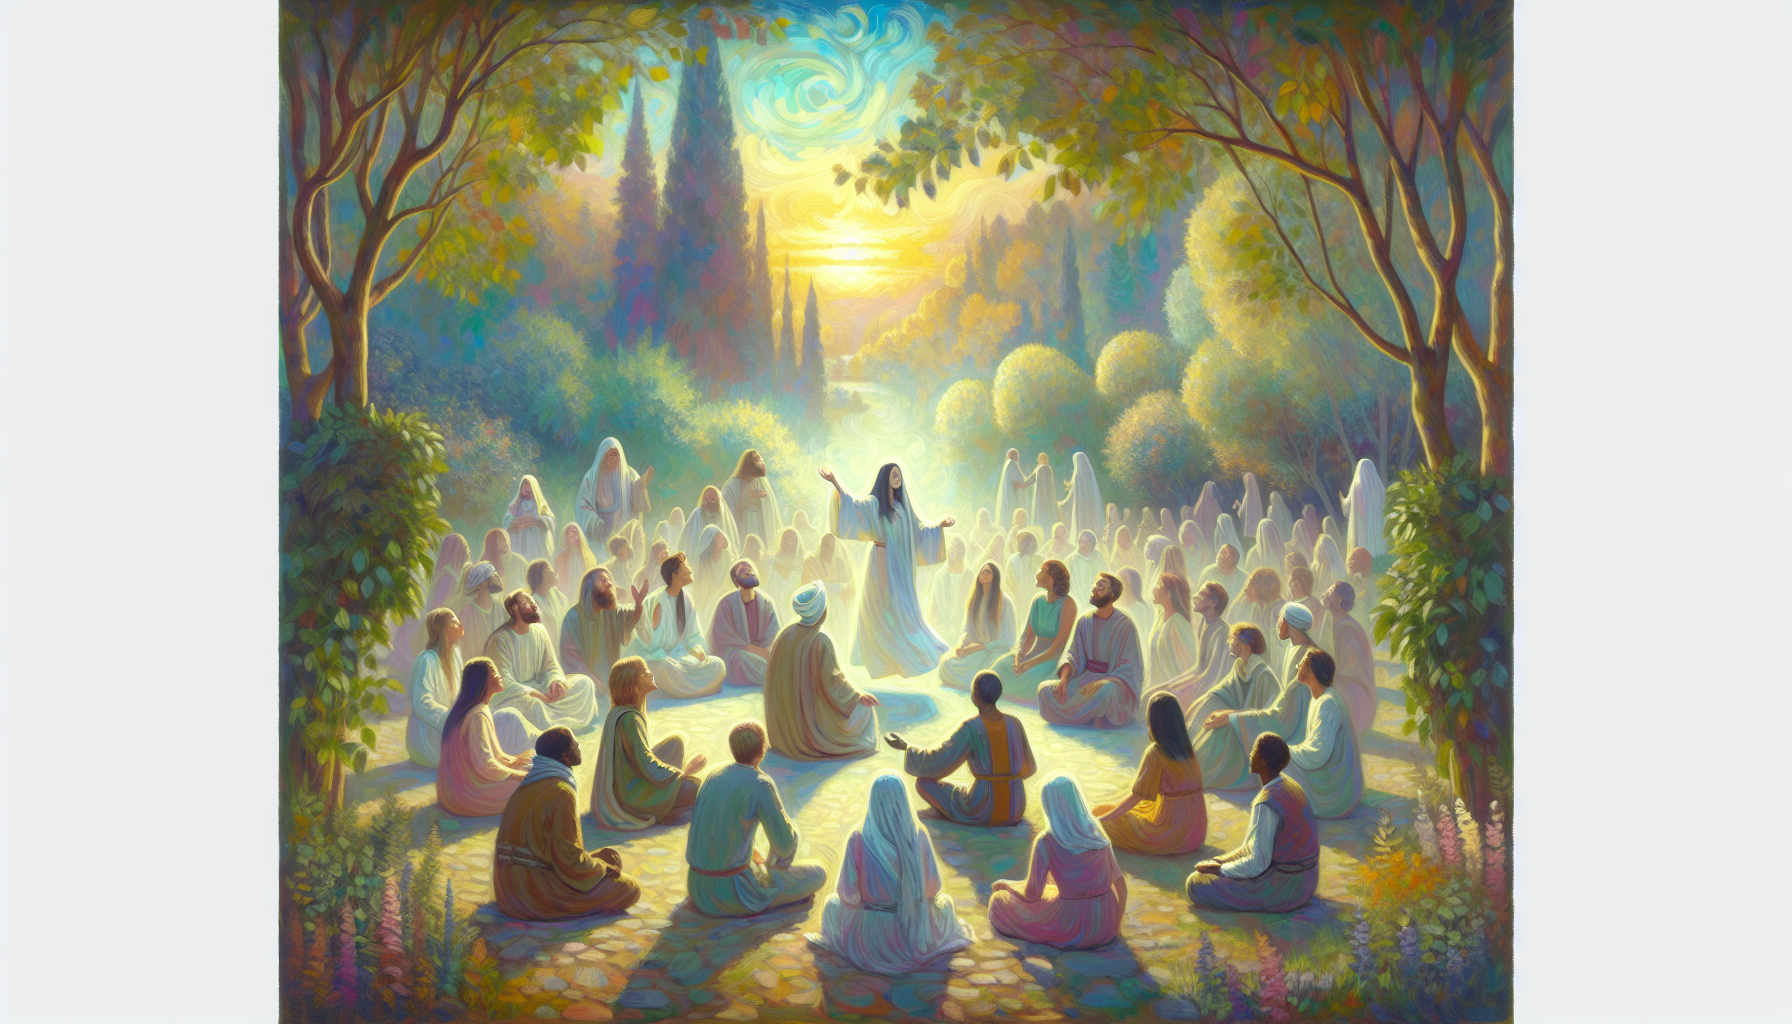 An ethereal and tranquil painting depicting a diverse group of people of various ethnicities gathered in a serene, sunlit garden, symbolically sharing and feeling the spirit among them, illustrating v